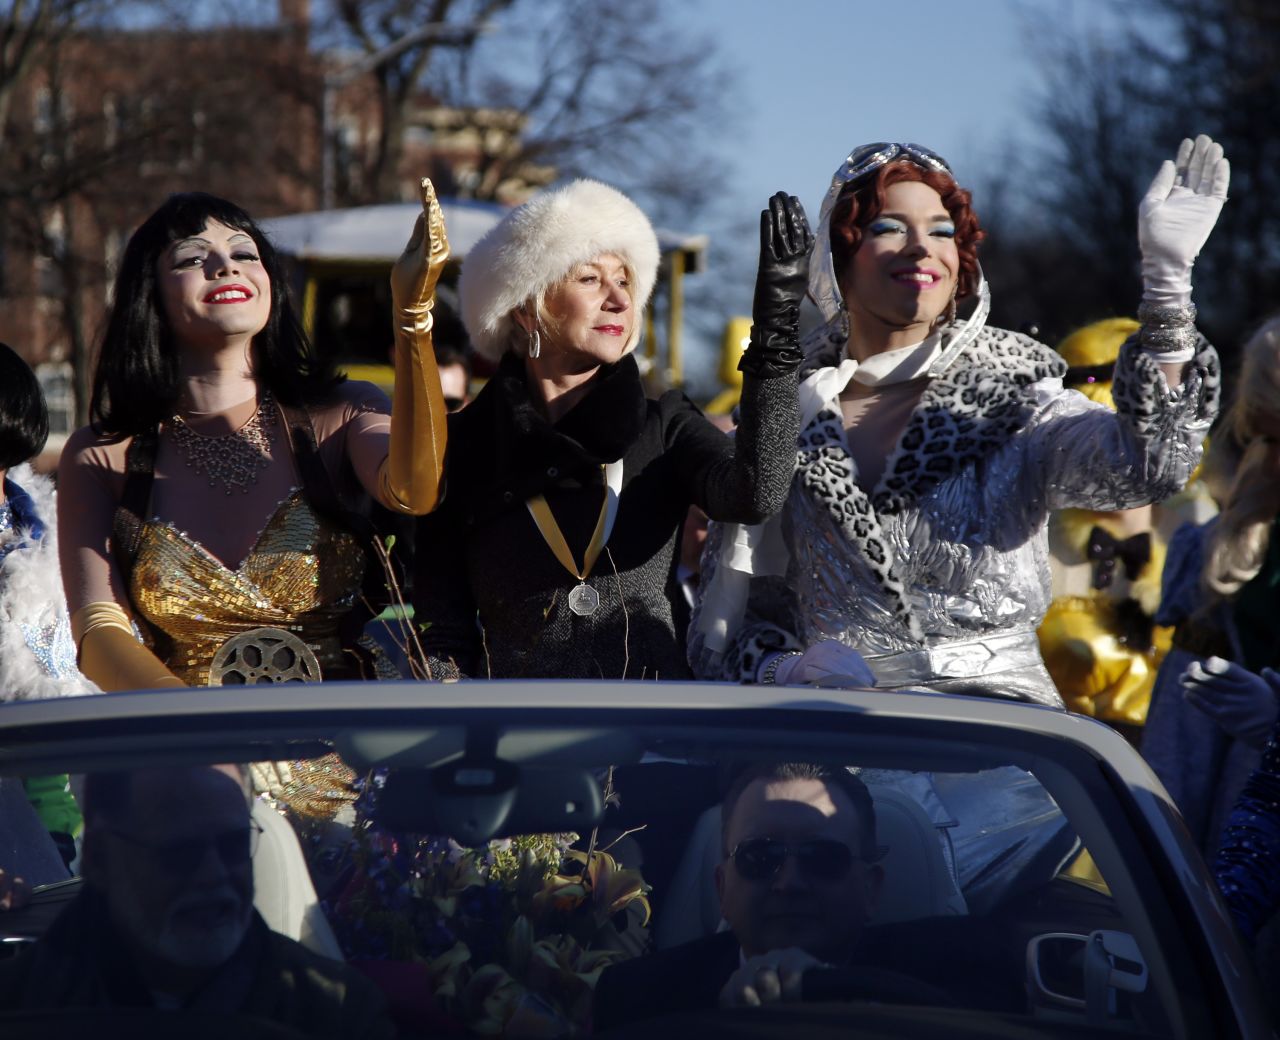 Mirren waves as she is paraded through Harvard Square alongside drag actors Tony Oblen, left, and Ethan Hardy. Helen was presented woman of the year by Harvard University's Hasty Pudding Theatricals in 2014.